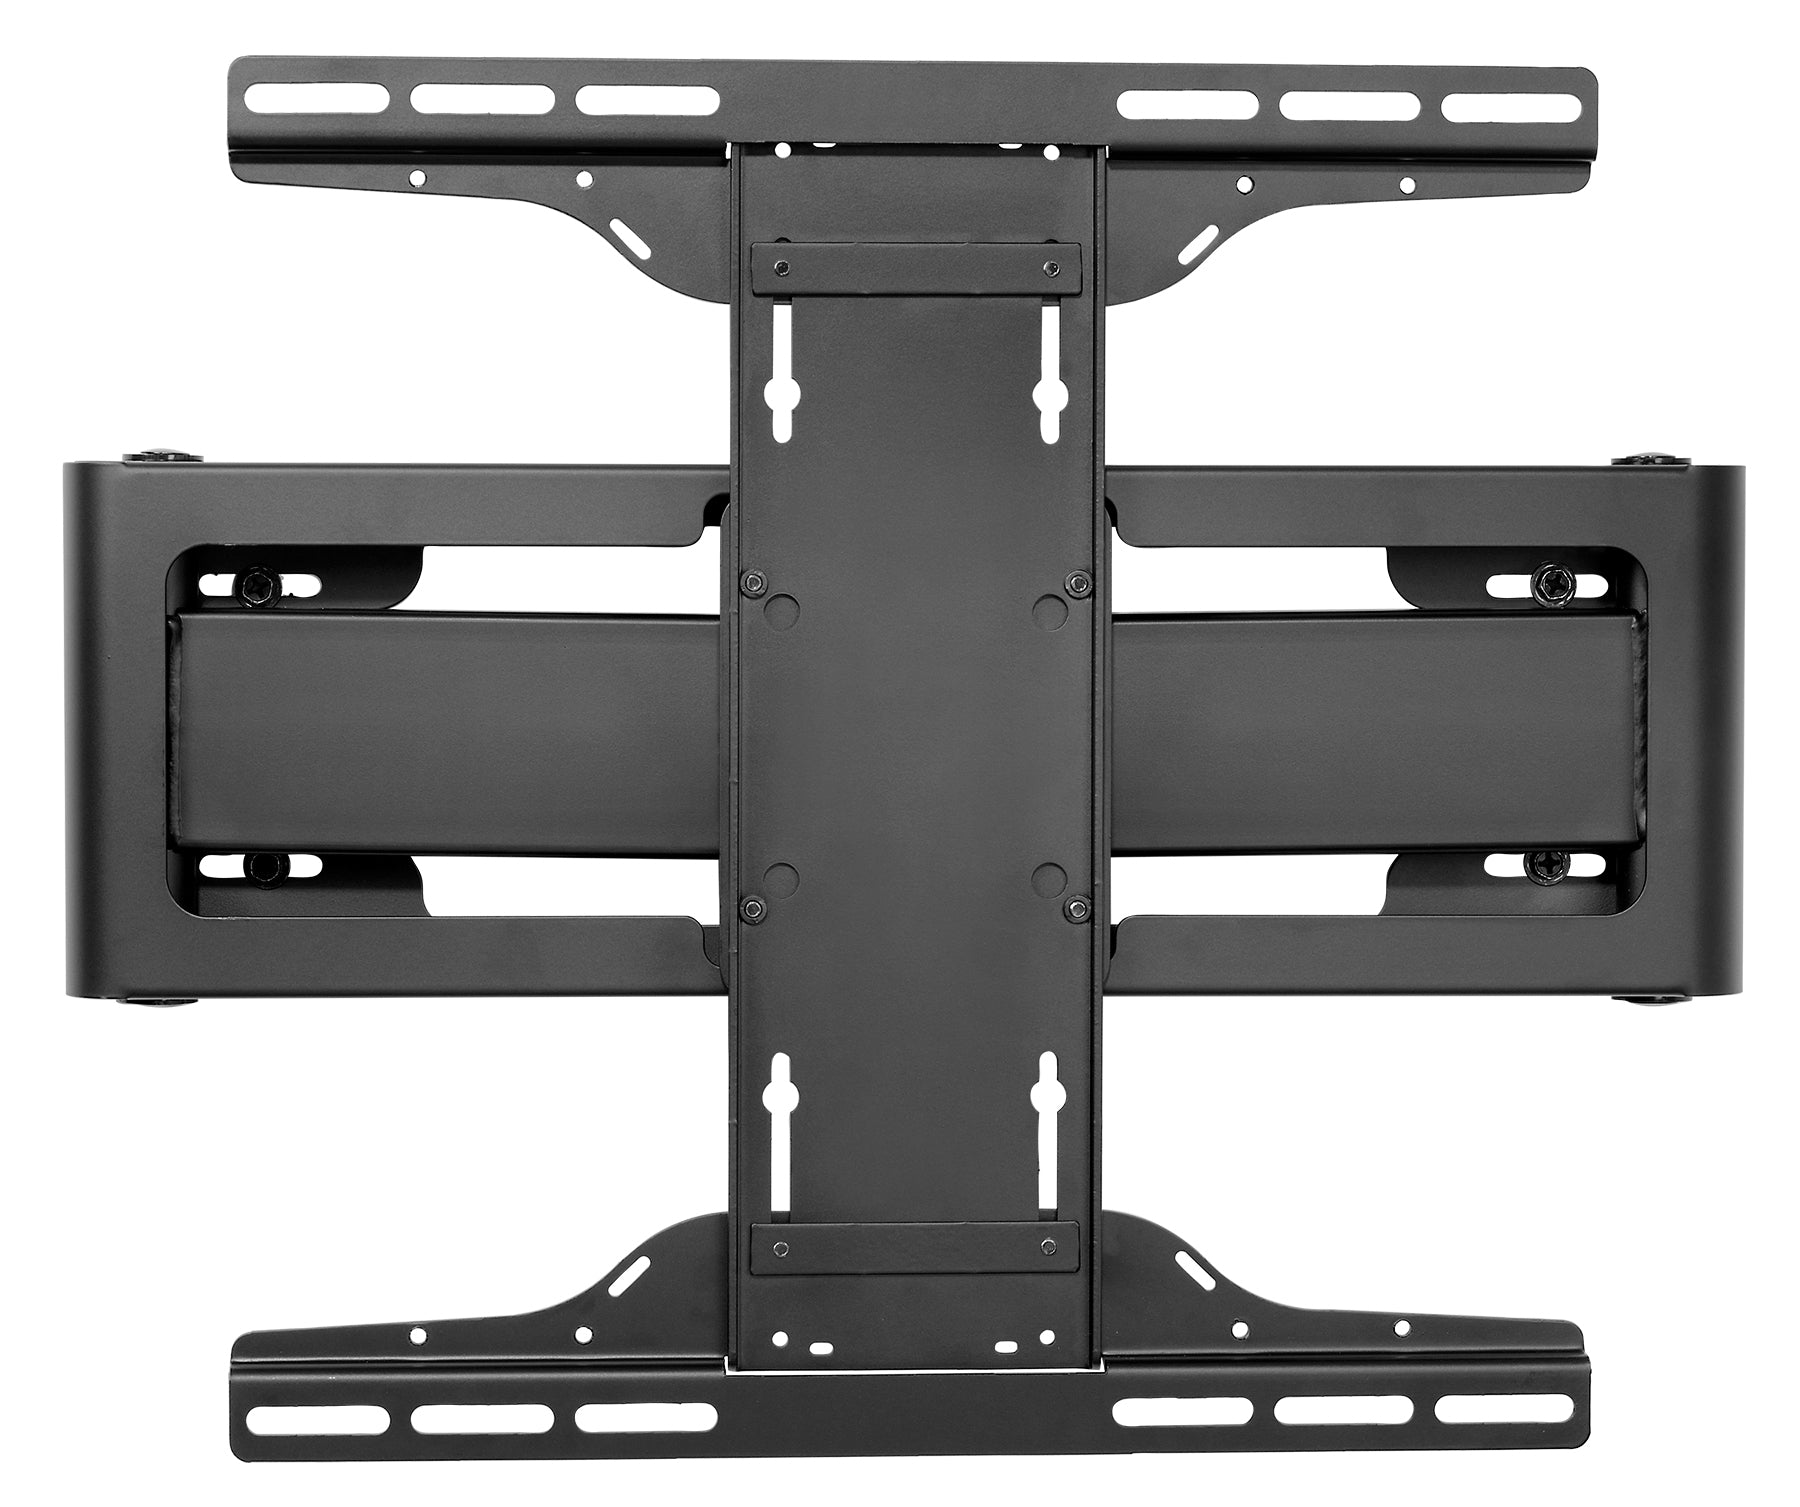 Pull Out Pivot Wall Mount For 32 To 65 Displays Peerless Av